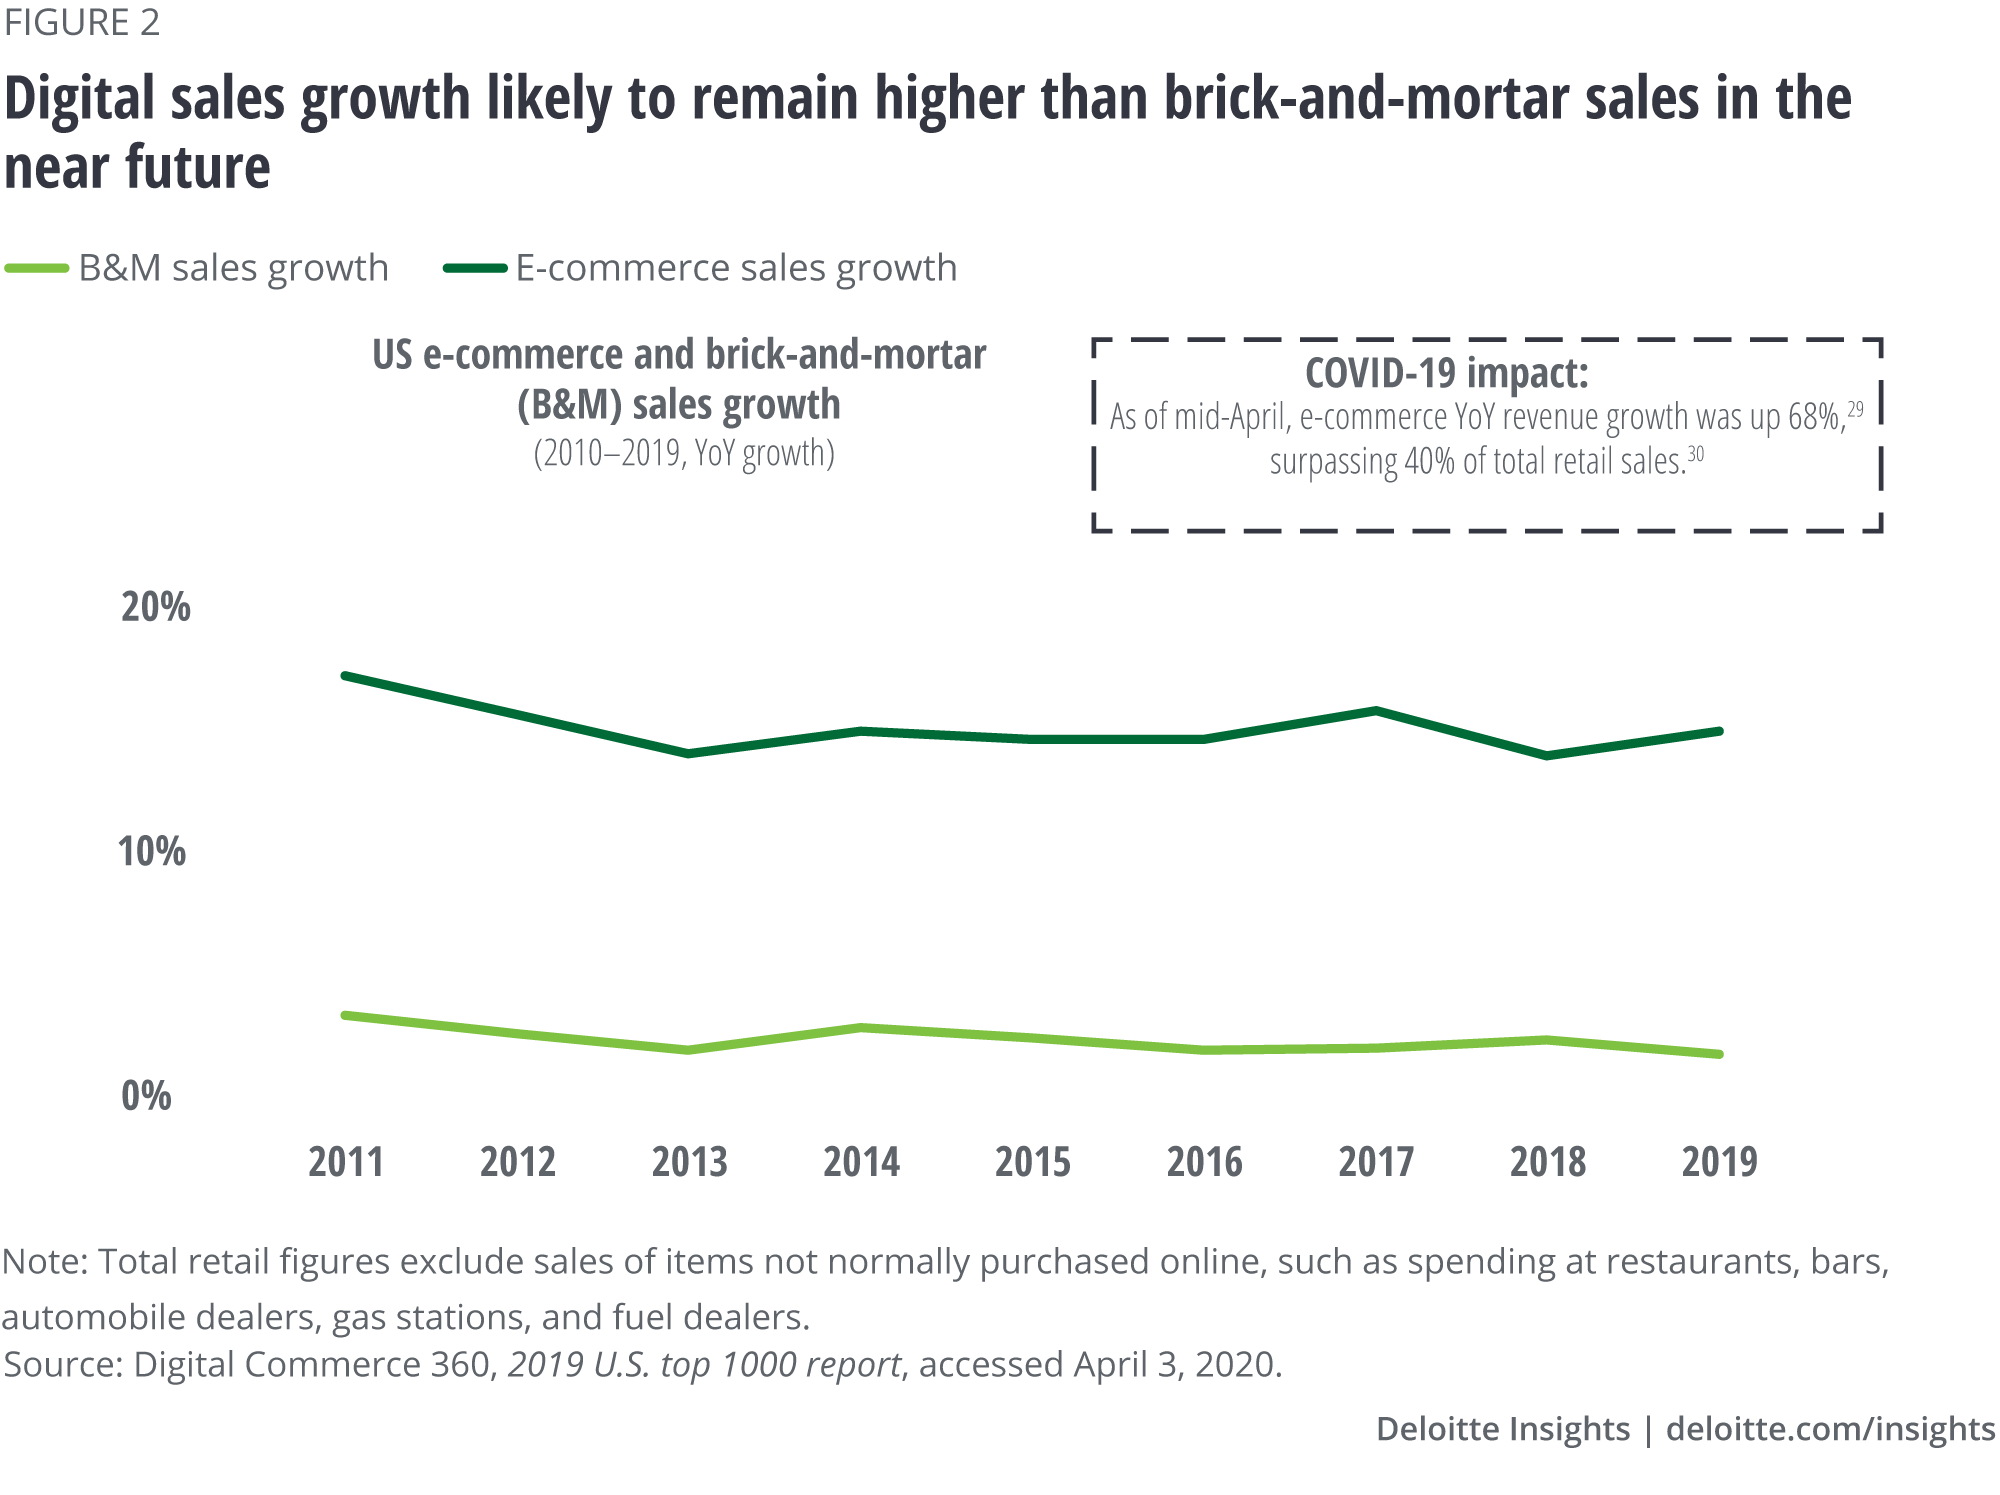 Digital sales is likely to remain higher than brick-and-mortar sales in the near future